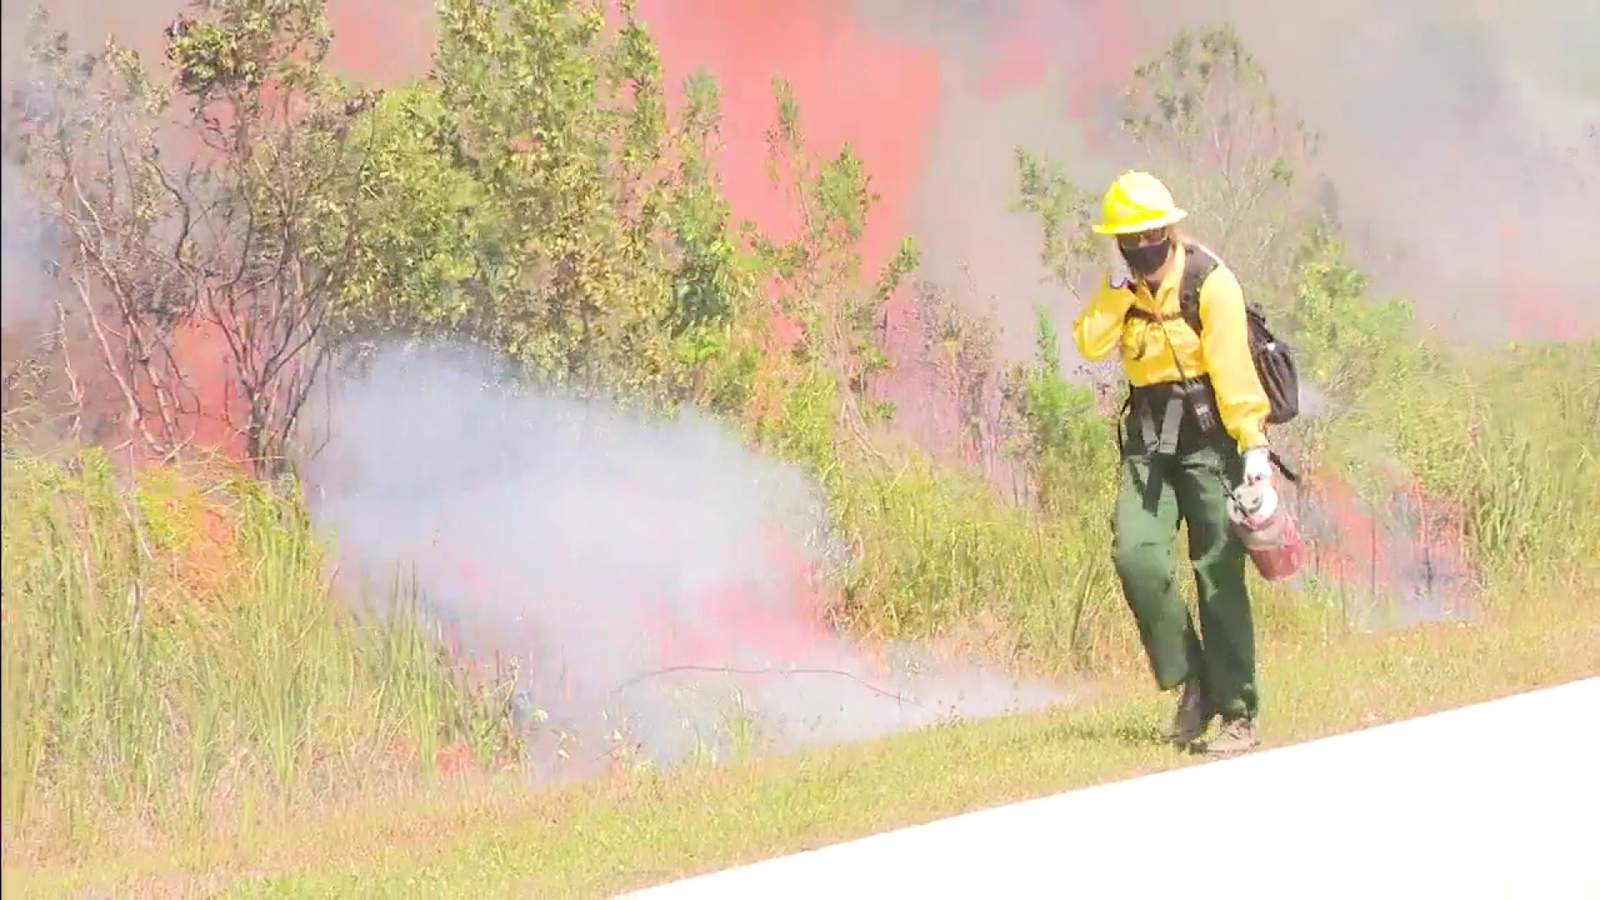 Wildfires have scorched 8,000 acres in Florida in 2021